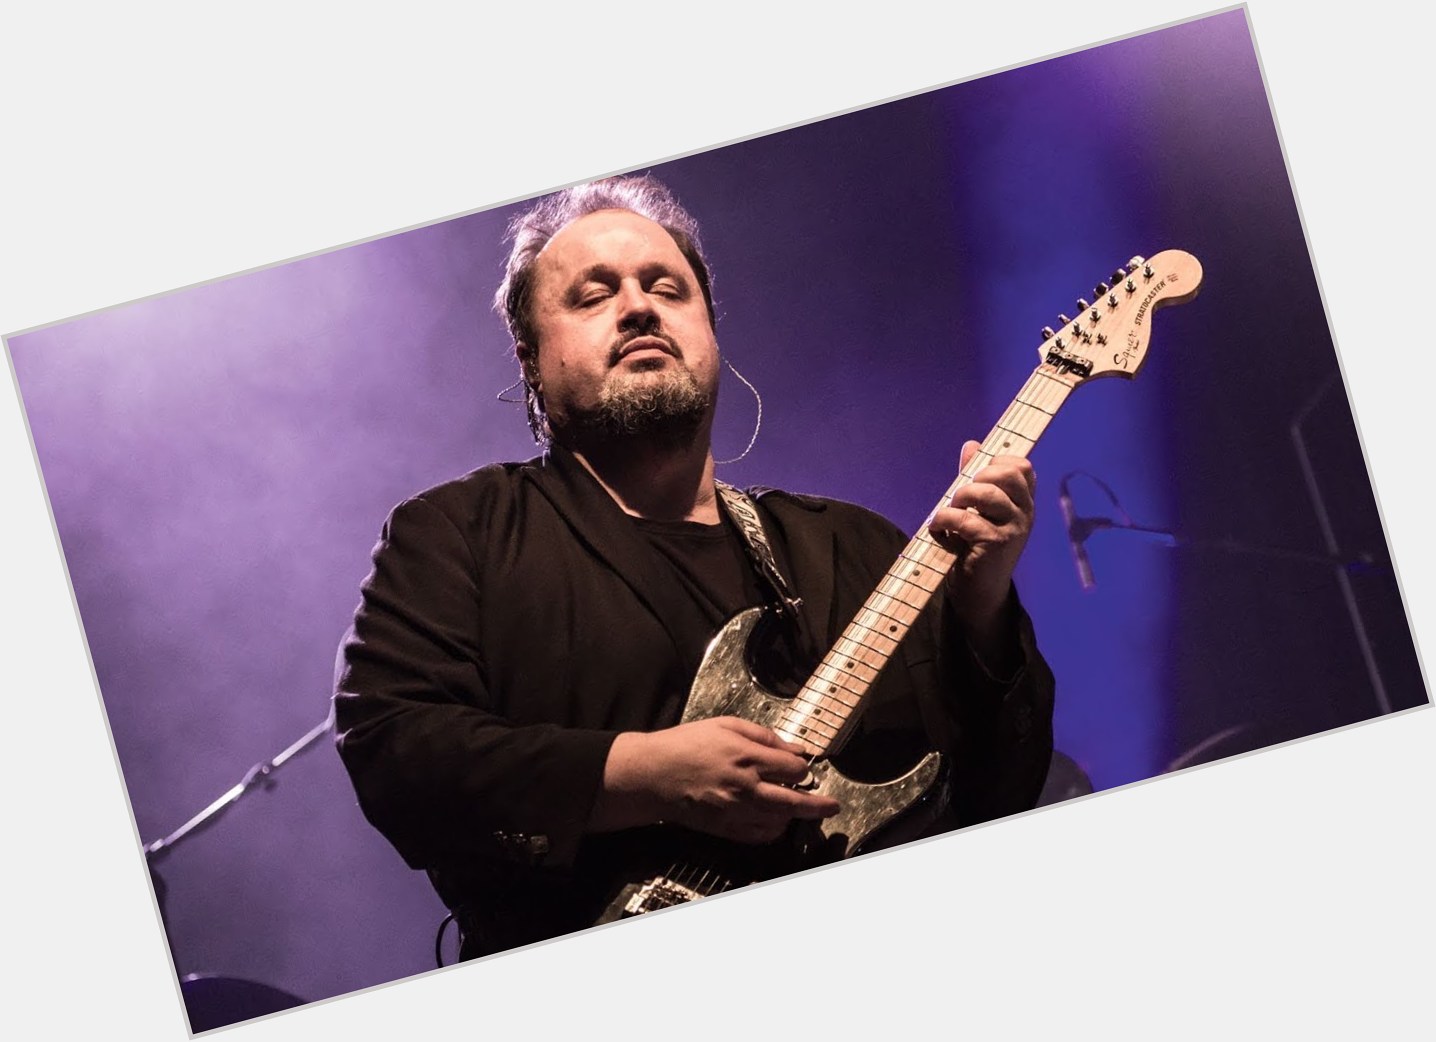 Http://fanpagepress.net/m/S/Steve Rothery Dating 2